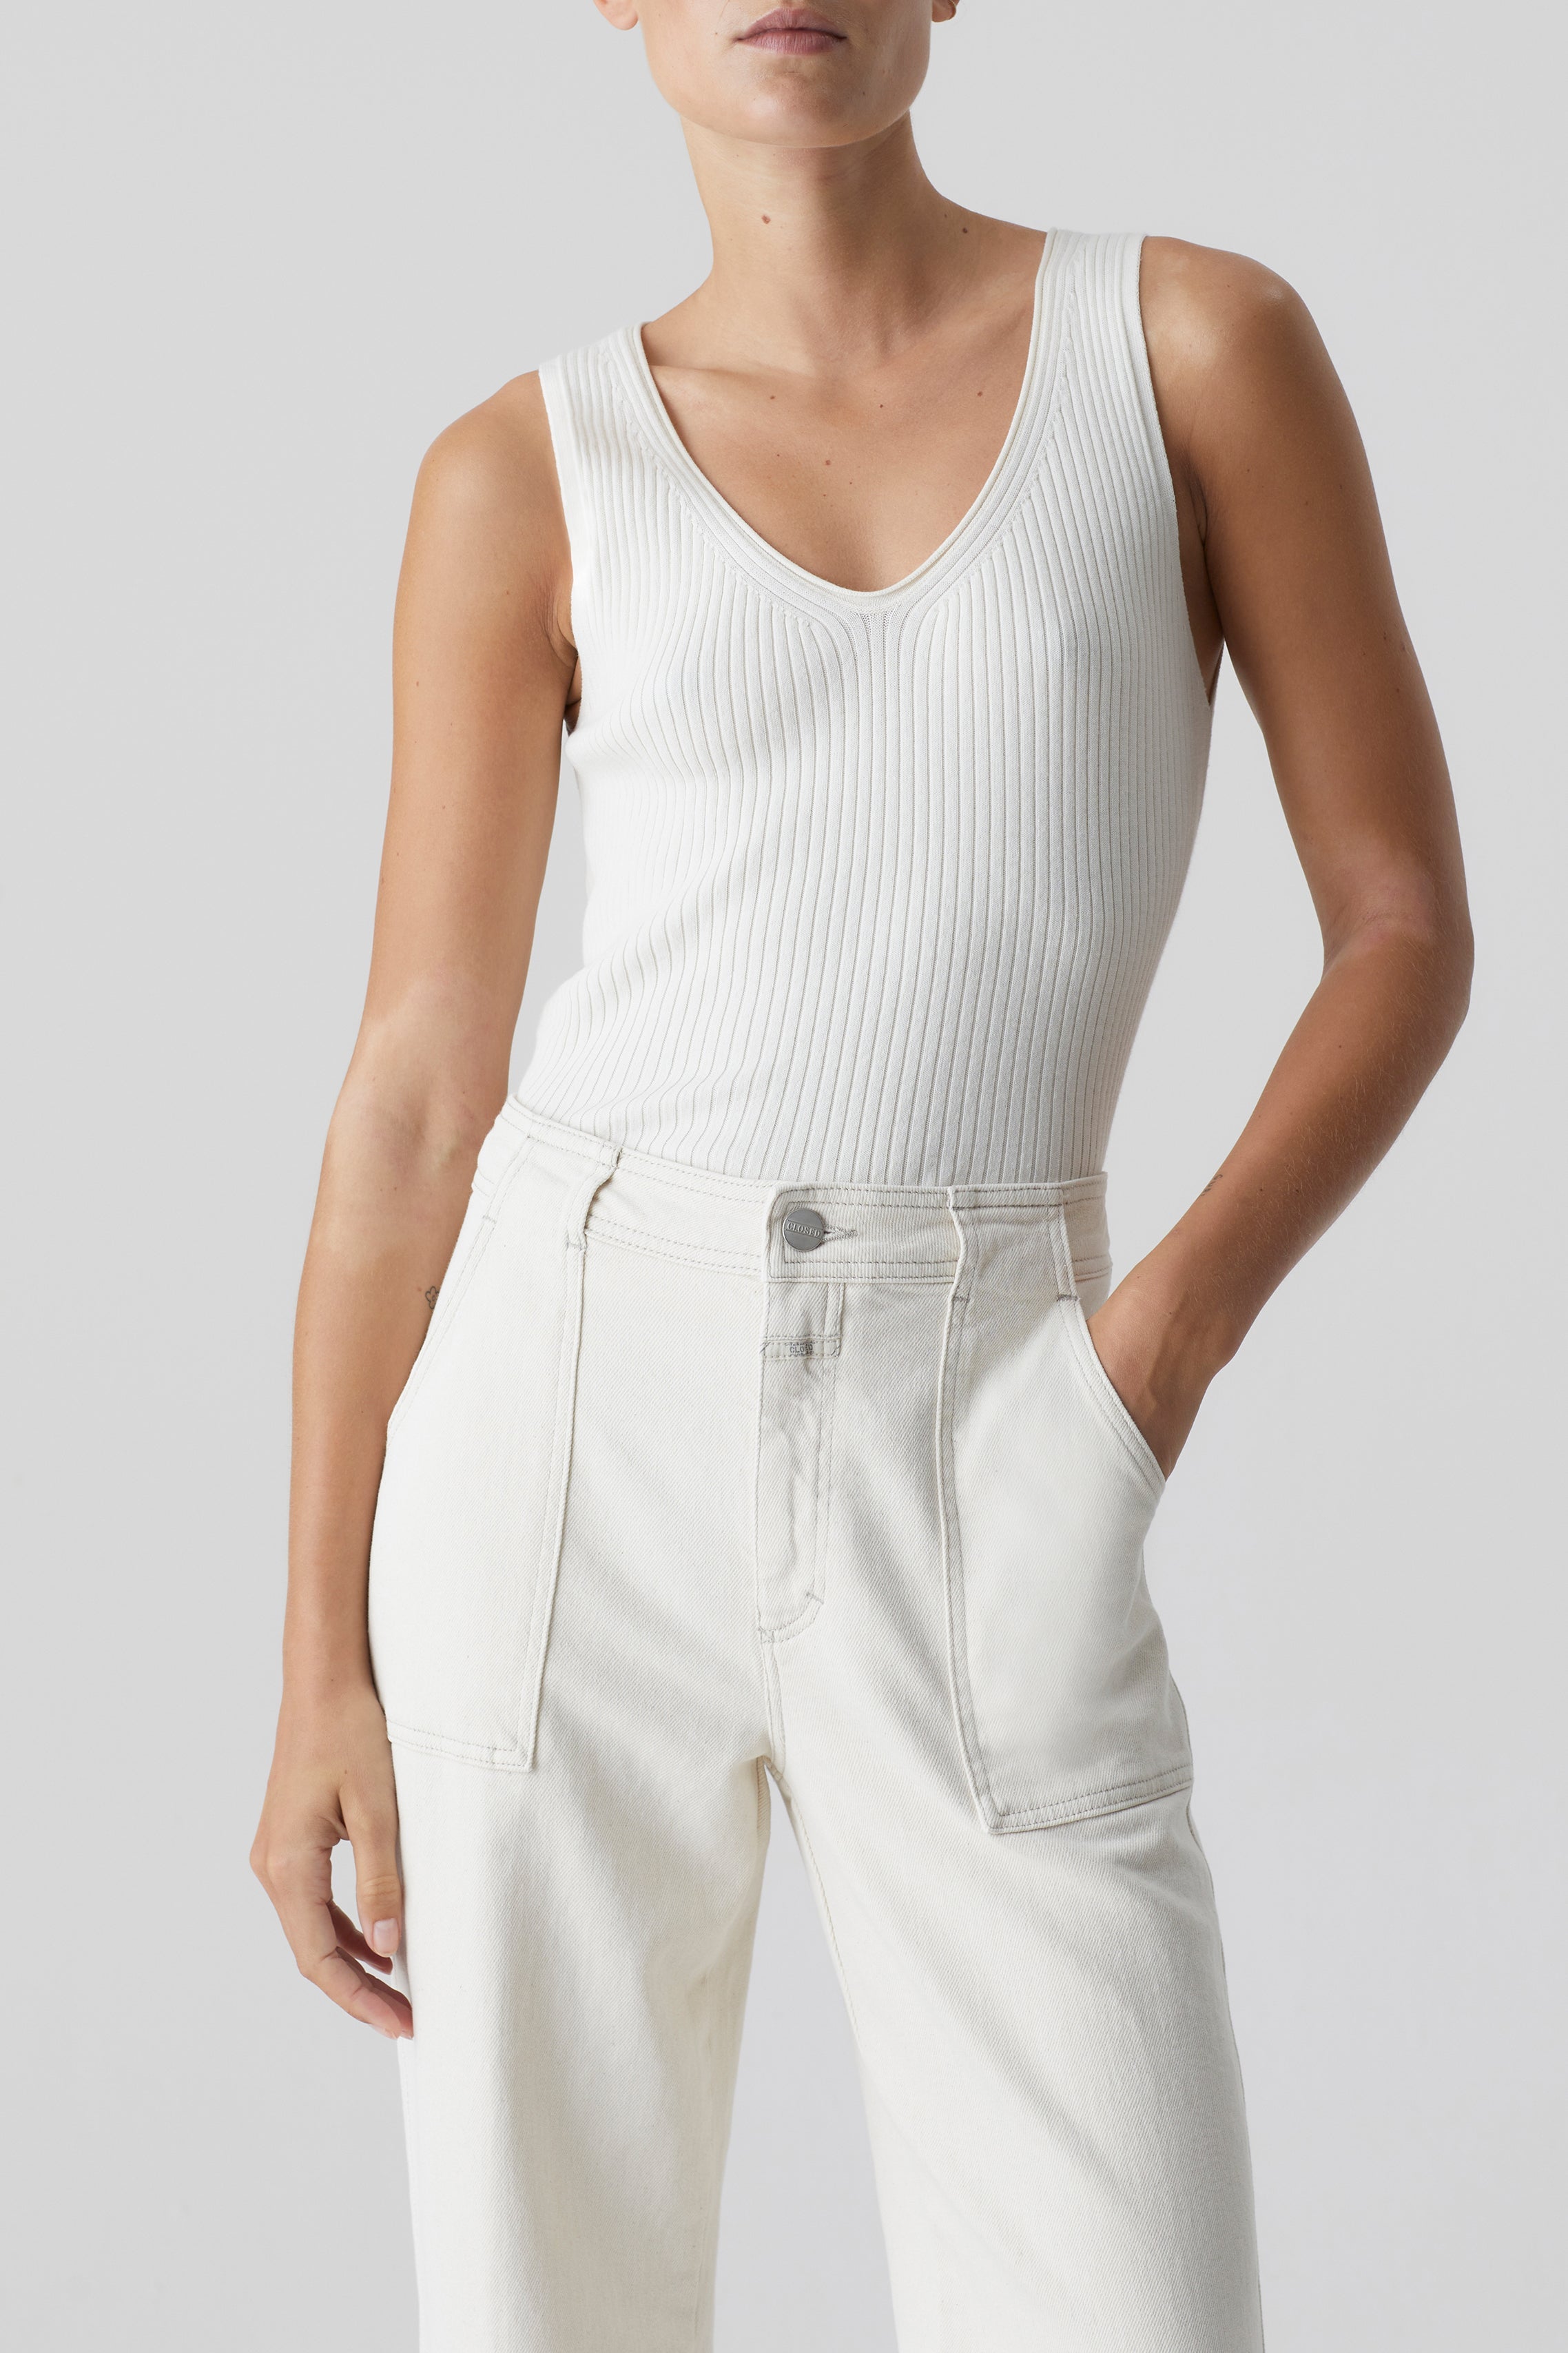 CLOSED-OUTLET-SALE-V-NECK-CROPPED-TOP-Strick-ARCHIVE-COLLECTION.jpg